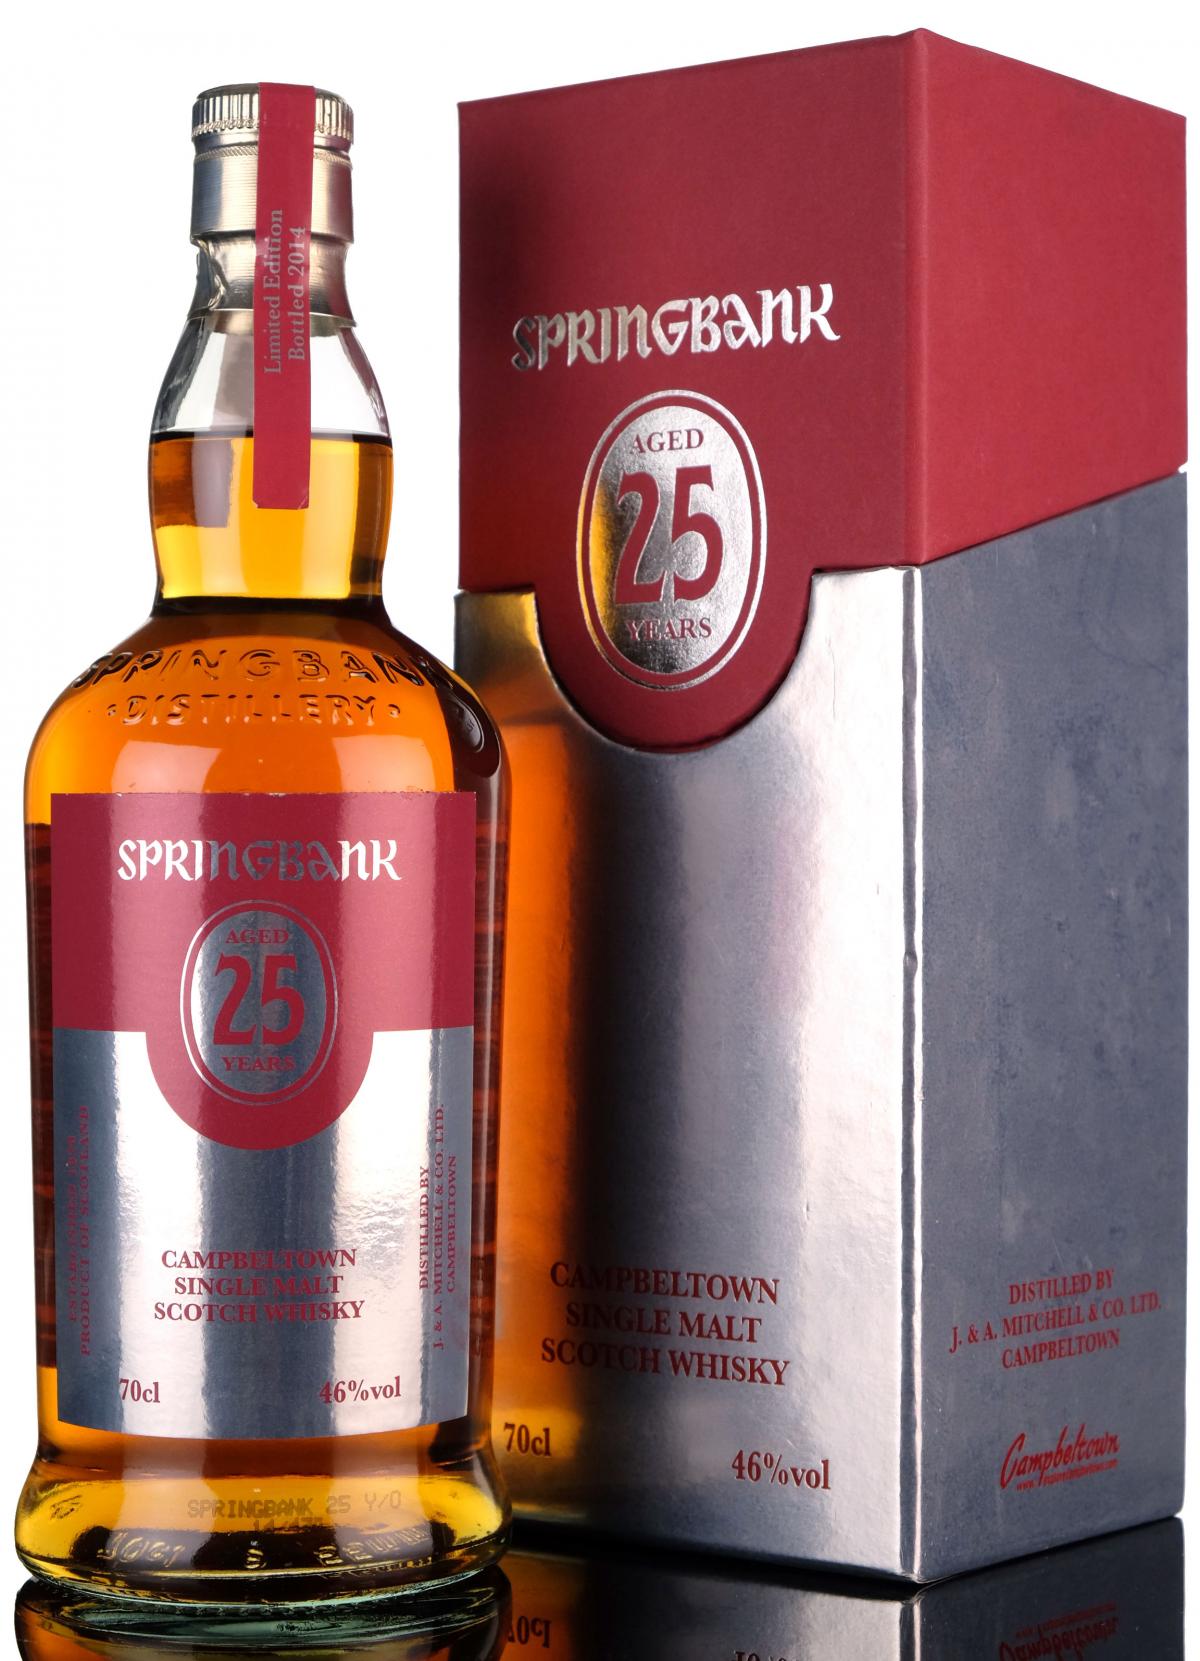 Springbank 25 Year Old - Limited Edition - 2014 Release